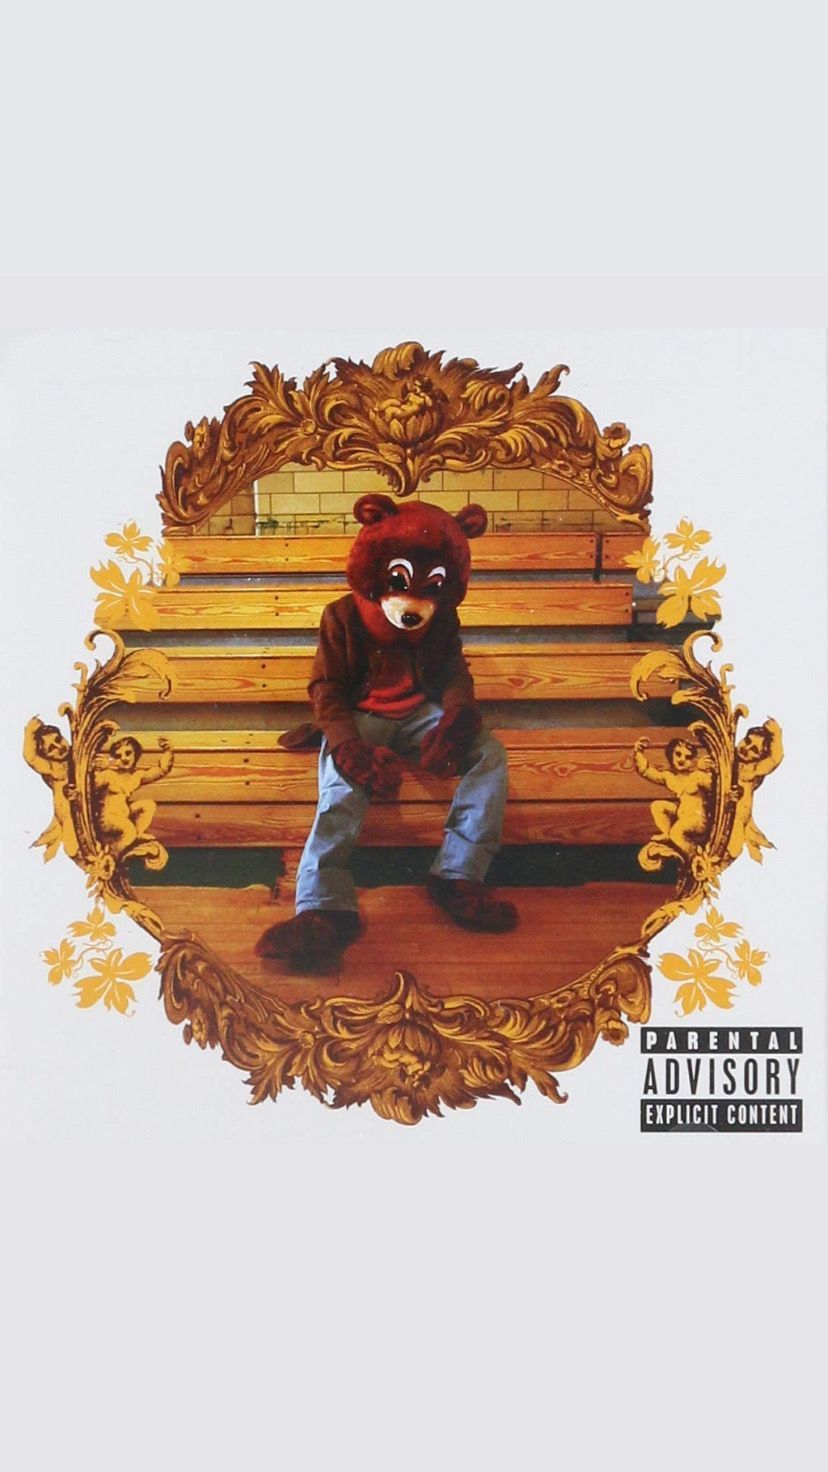 Late Registration Was the Last Great Album by the Old Kanye  GQ